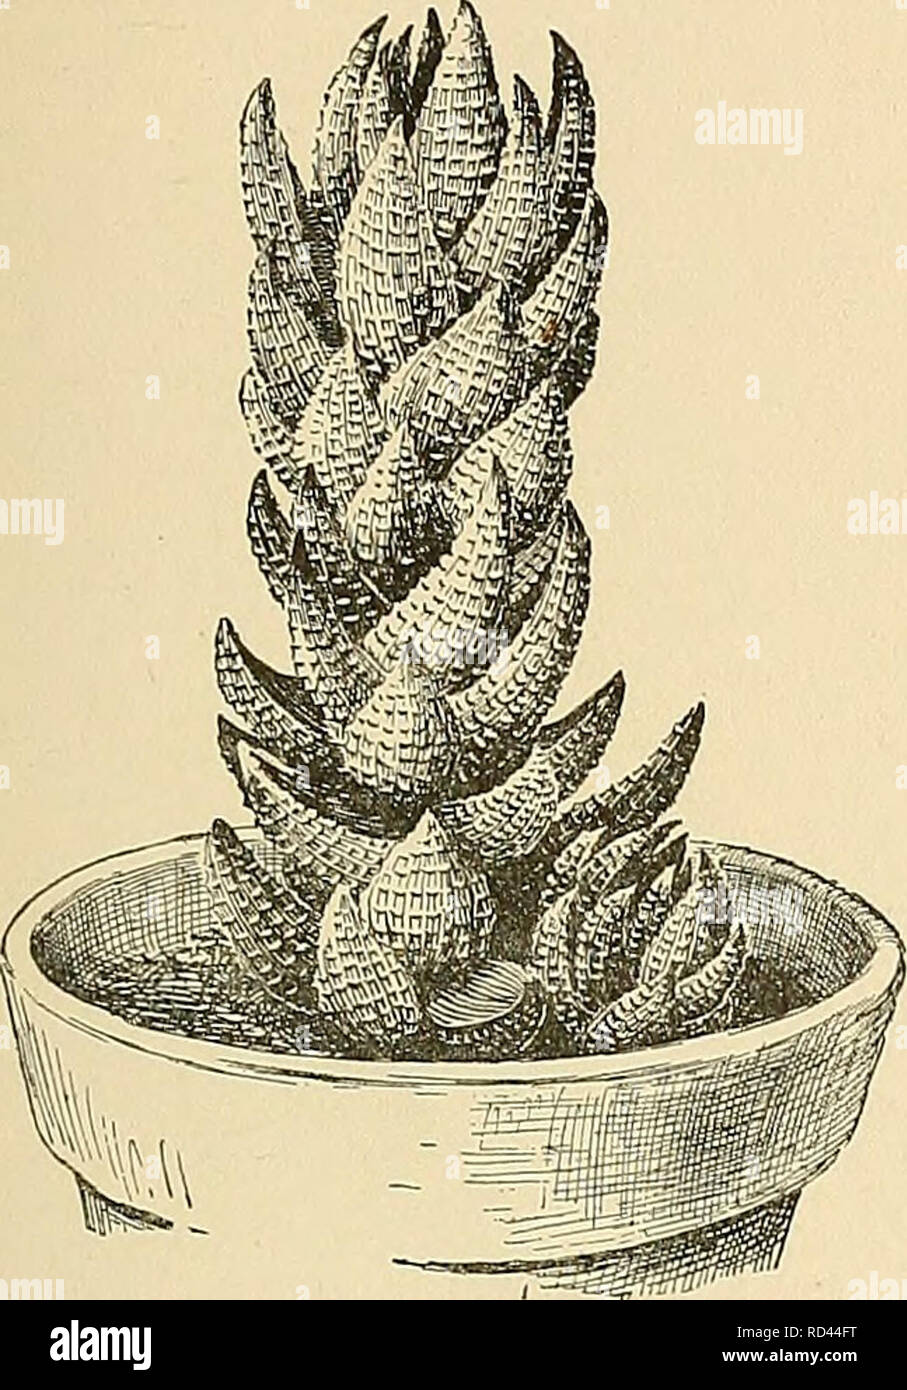 . Cyclopedia of American horticulture, comprising suggestions for cultivation of horticultural plants, descriptions of the species of fruits, vegetables, flowers, and ornamental plants sold in the United States and Canada, together with geographical and biographical sketches. Gardening. HAWORTHIA HECHTIA 715 9. margaritiJera, Haw. {If.mcijor, Duval. Aide mar- garitifera, Biirm.). Lvs. turgid, spreading, merely acute, both faces with scattered coarse white tubercles, which often turn green on the upper surface. P.G. 57. Varies into several named forms. DD. The lvs. less eonspicuoushj white-tube Stock Photo